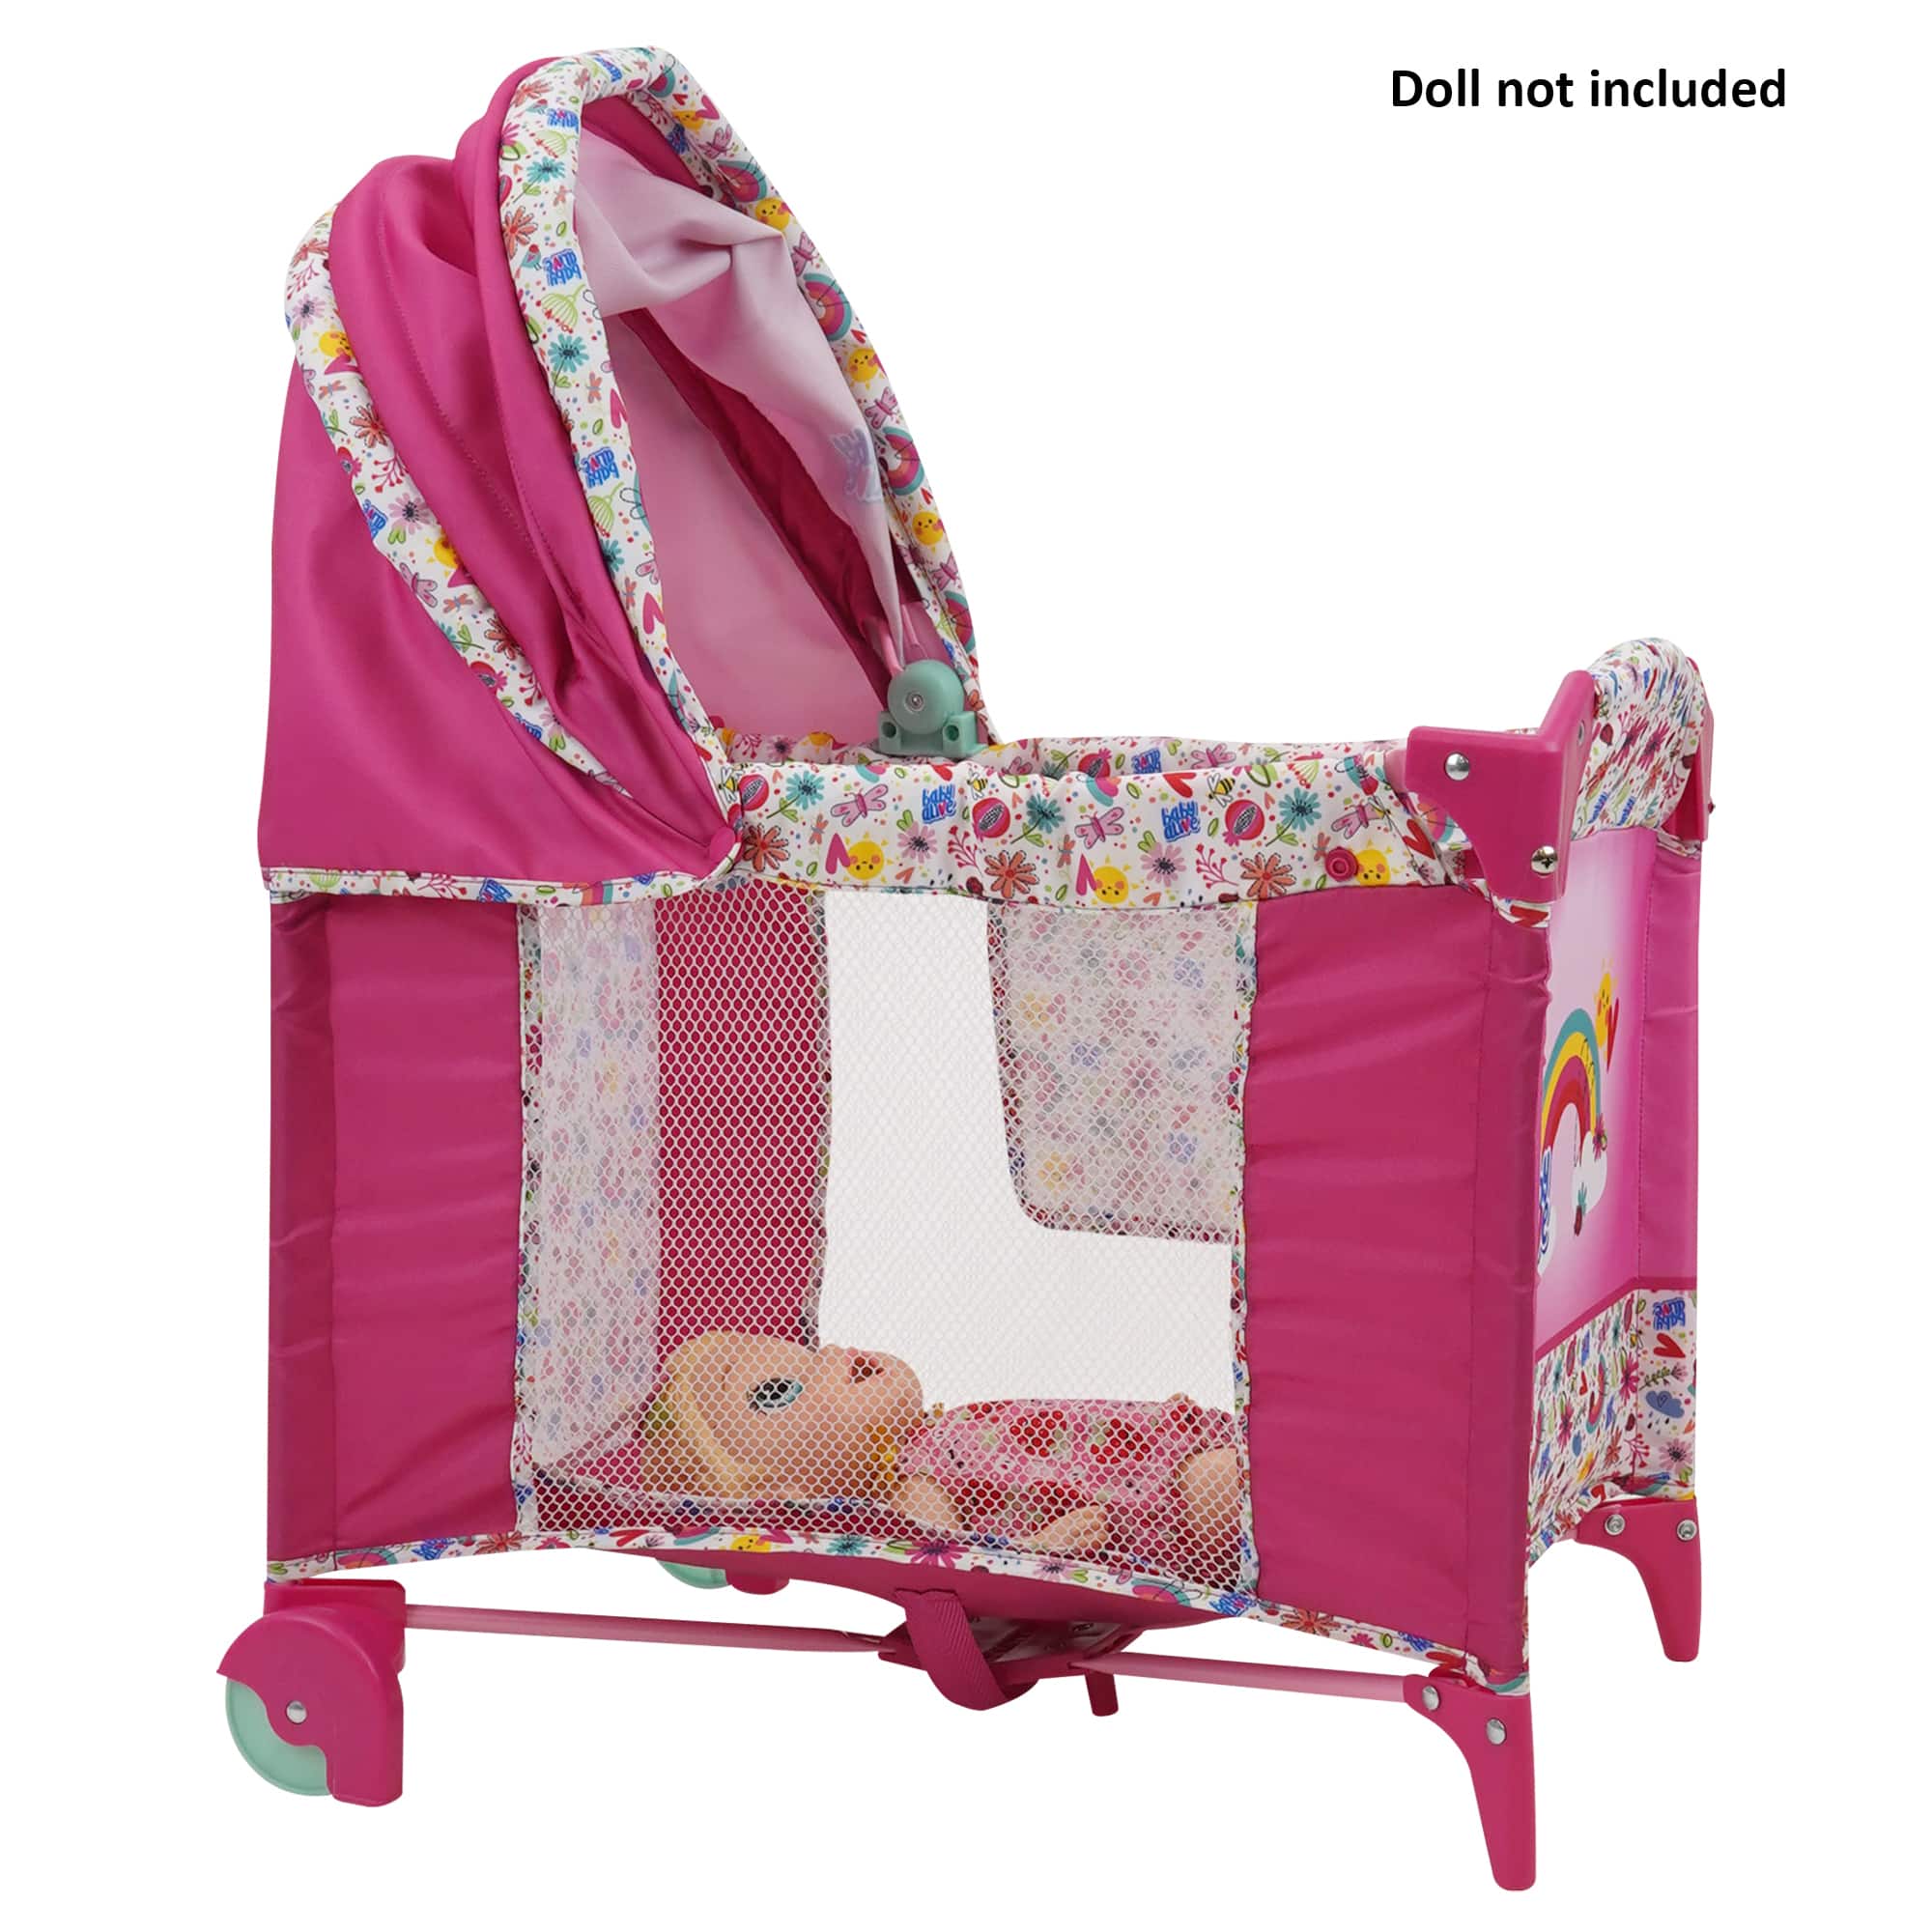 509 Crew Baby Alive Pink and Rainbow Deluxe Doll Play Yard